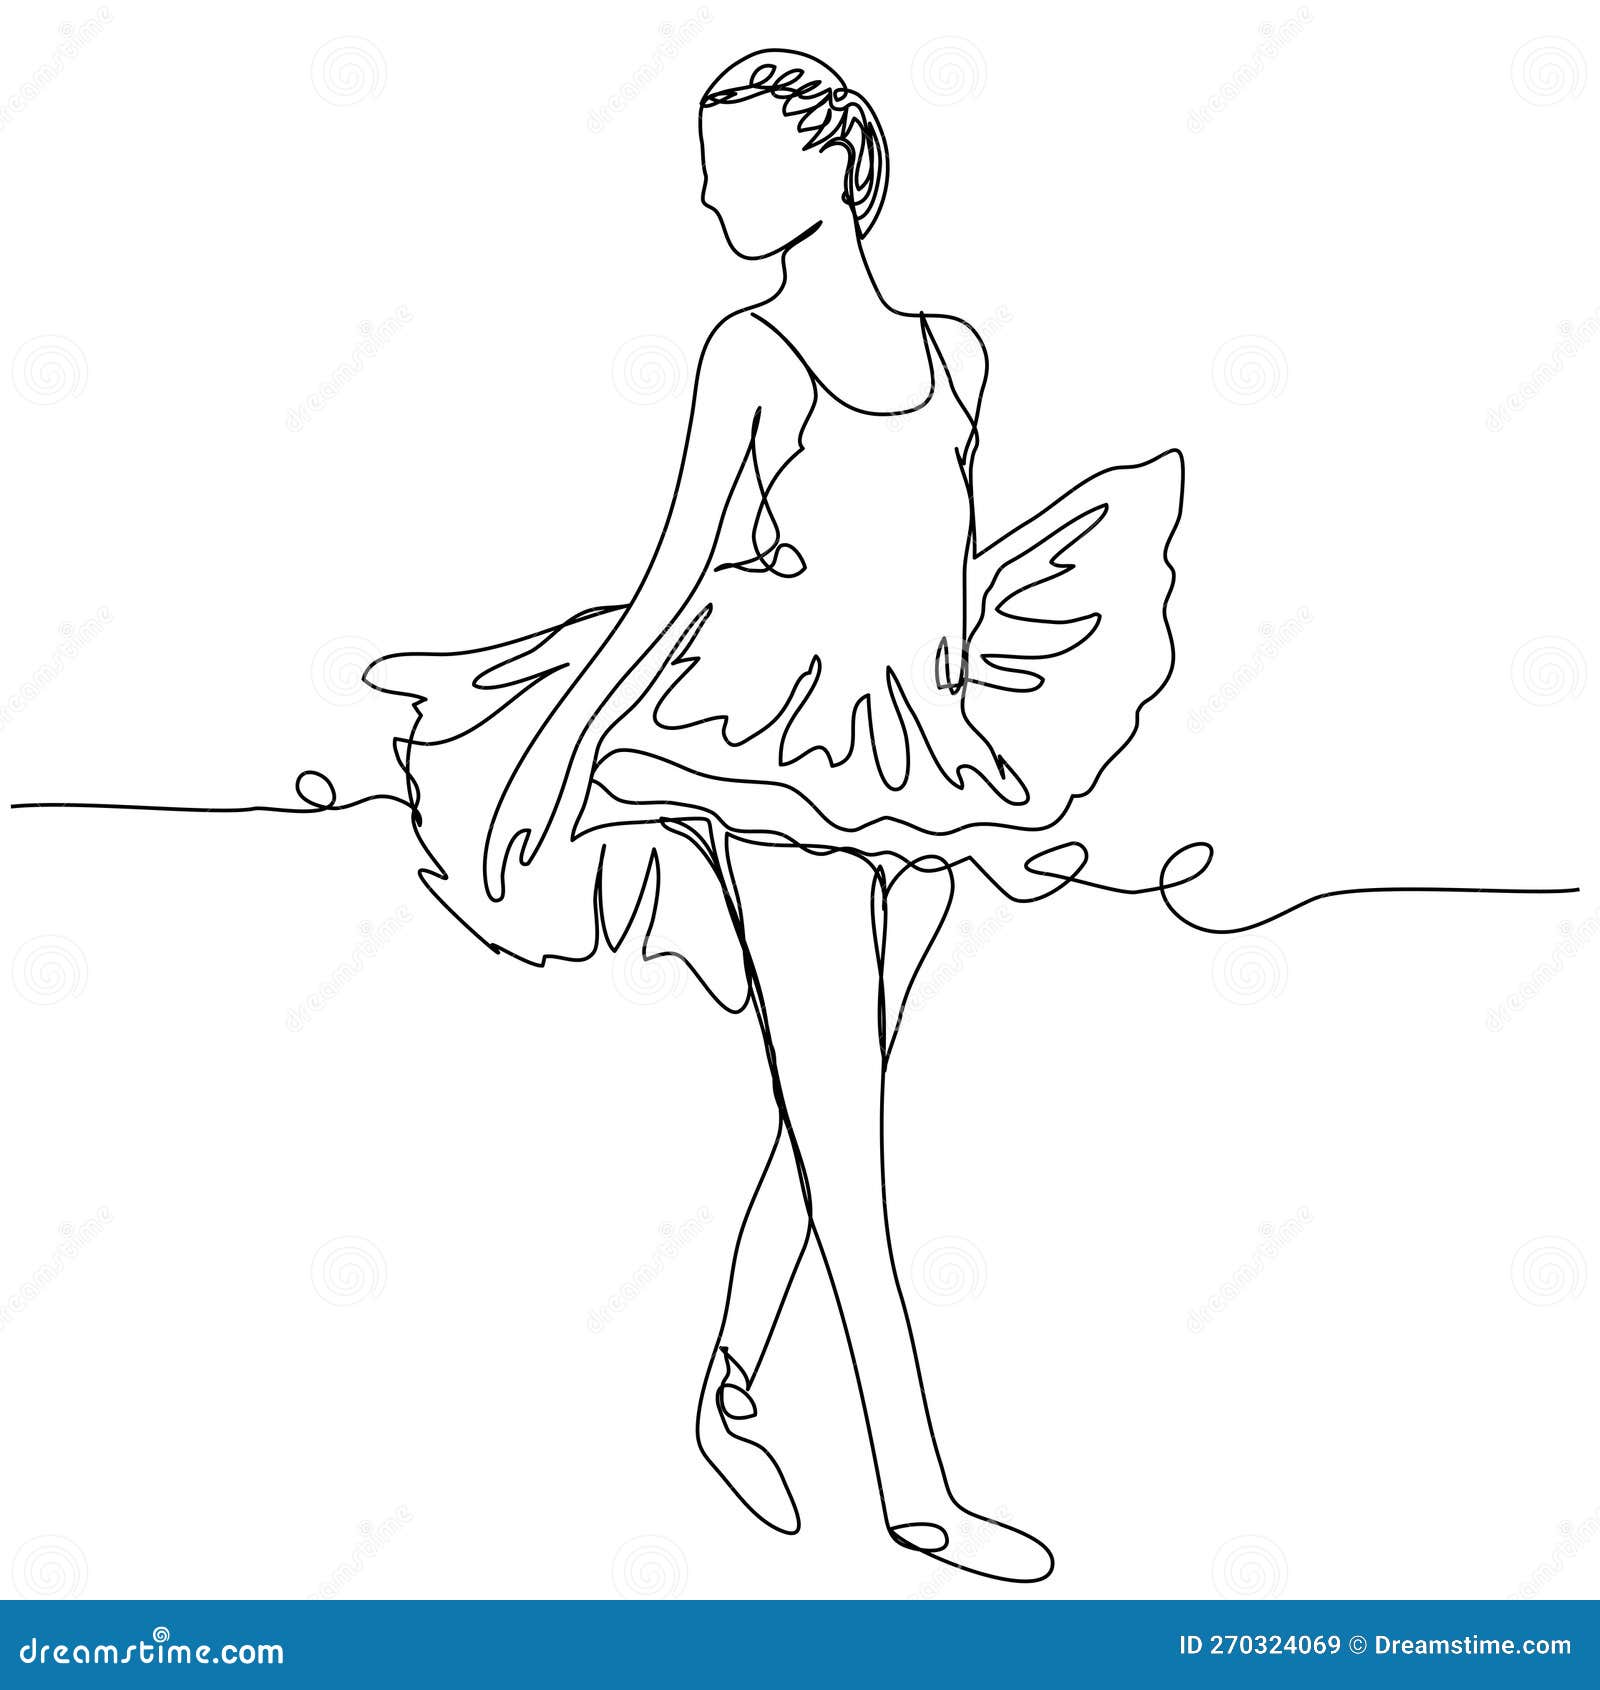 Simple Ballerina in One Line on a White Background. Stock Vector ...